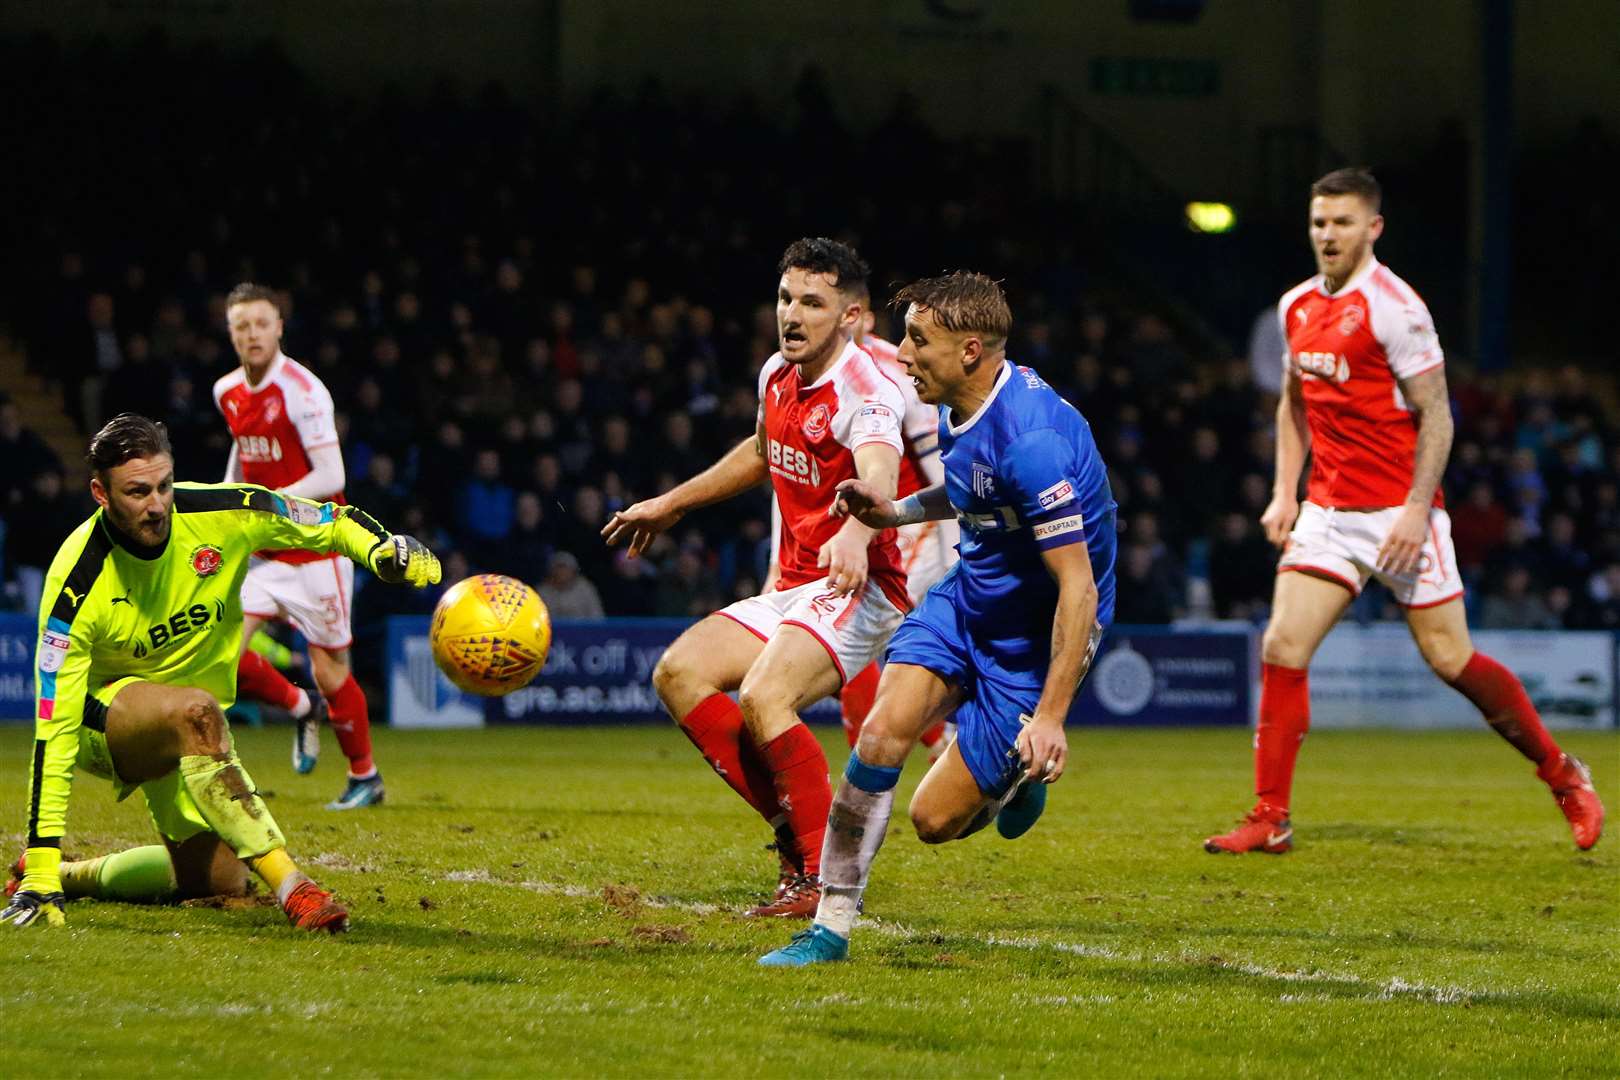 Lee Martin in action for the Gills Picture: Andy Jones